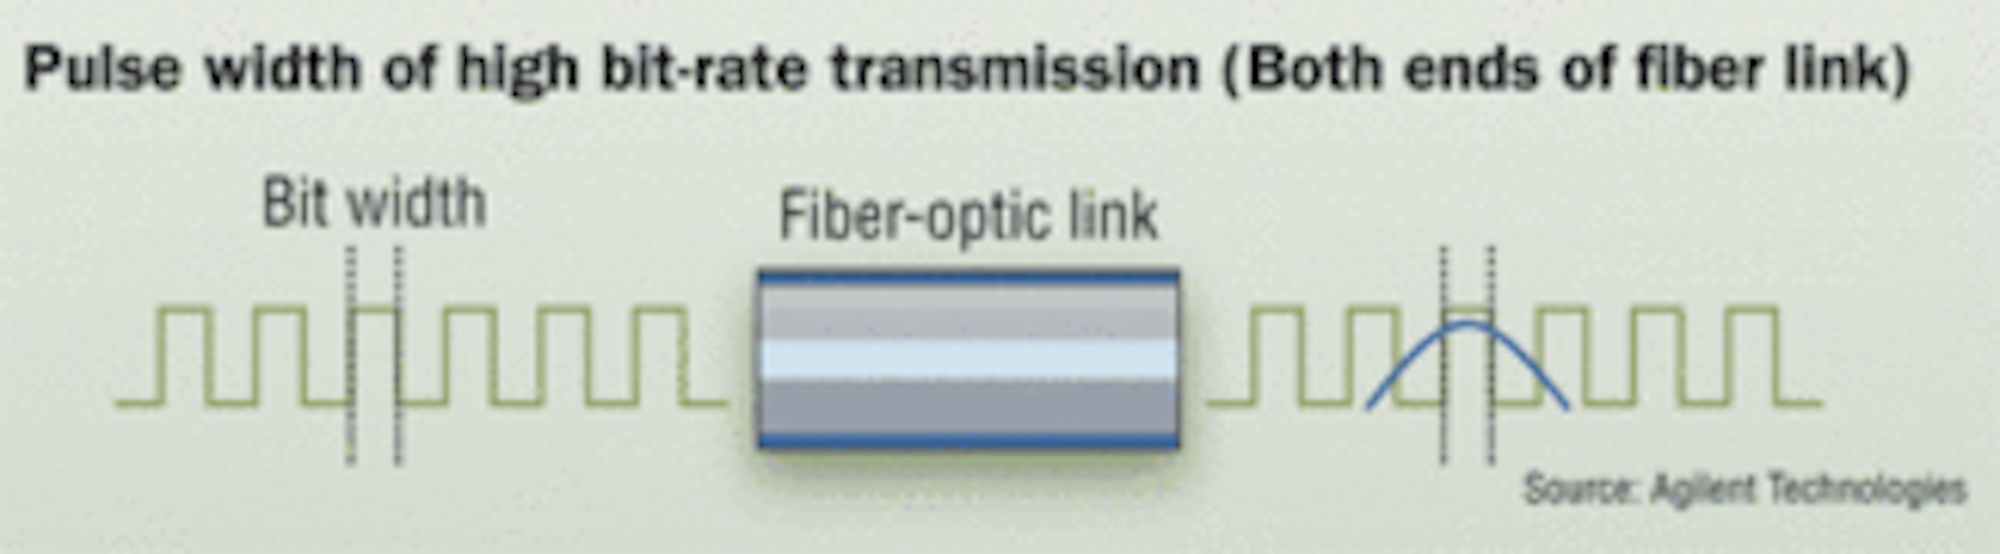 Fiber certification goes beyond characterization Cabling Installation